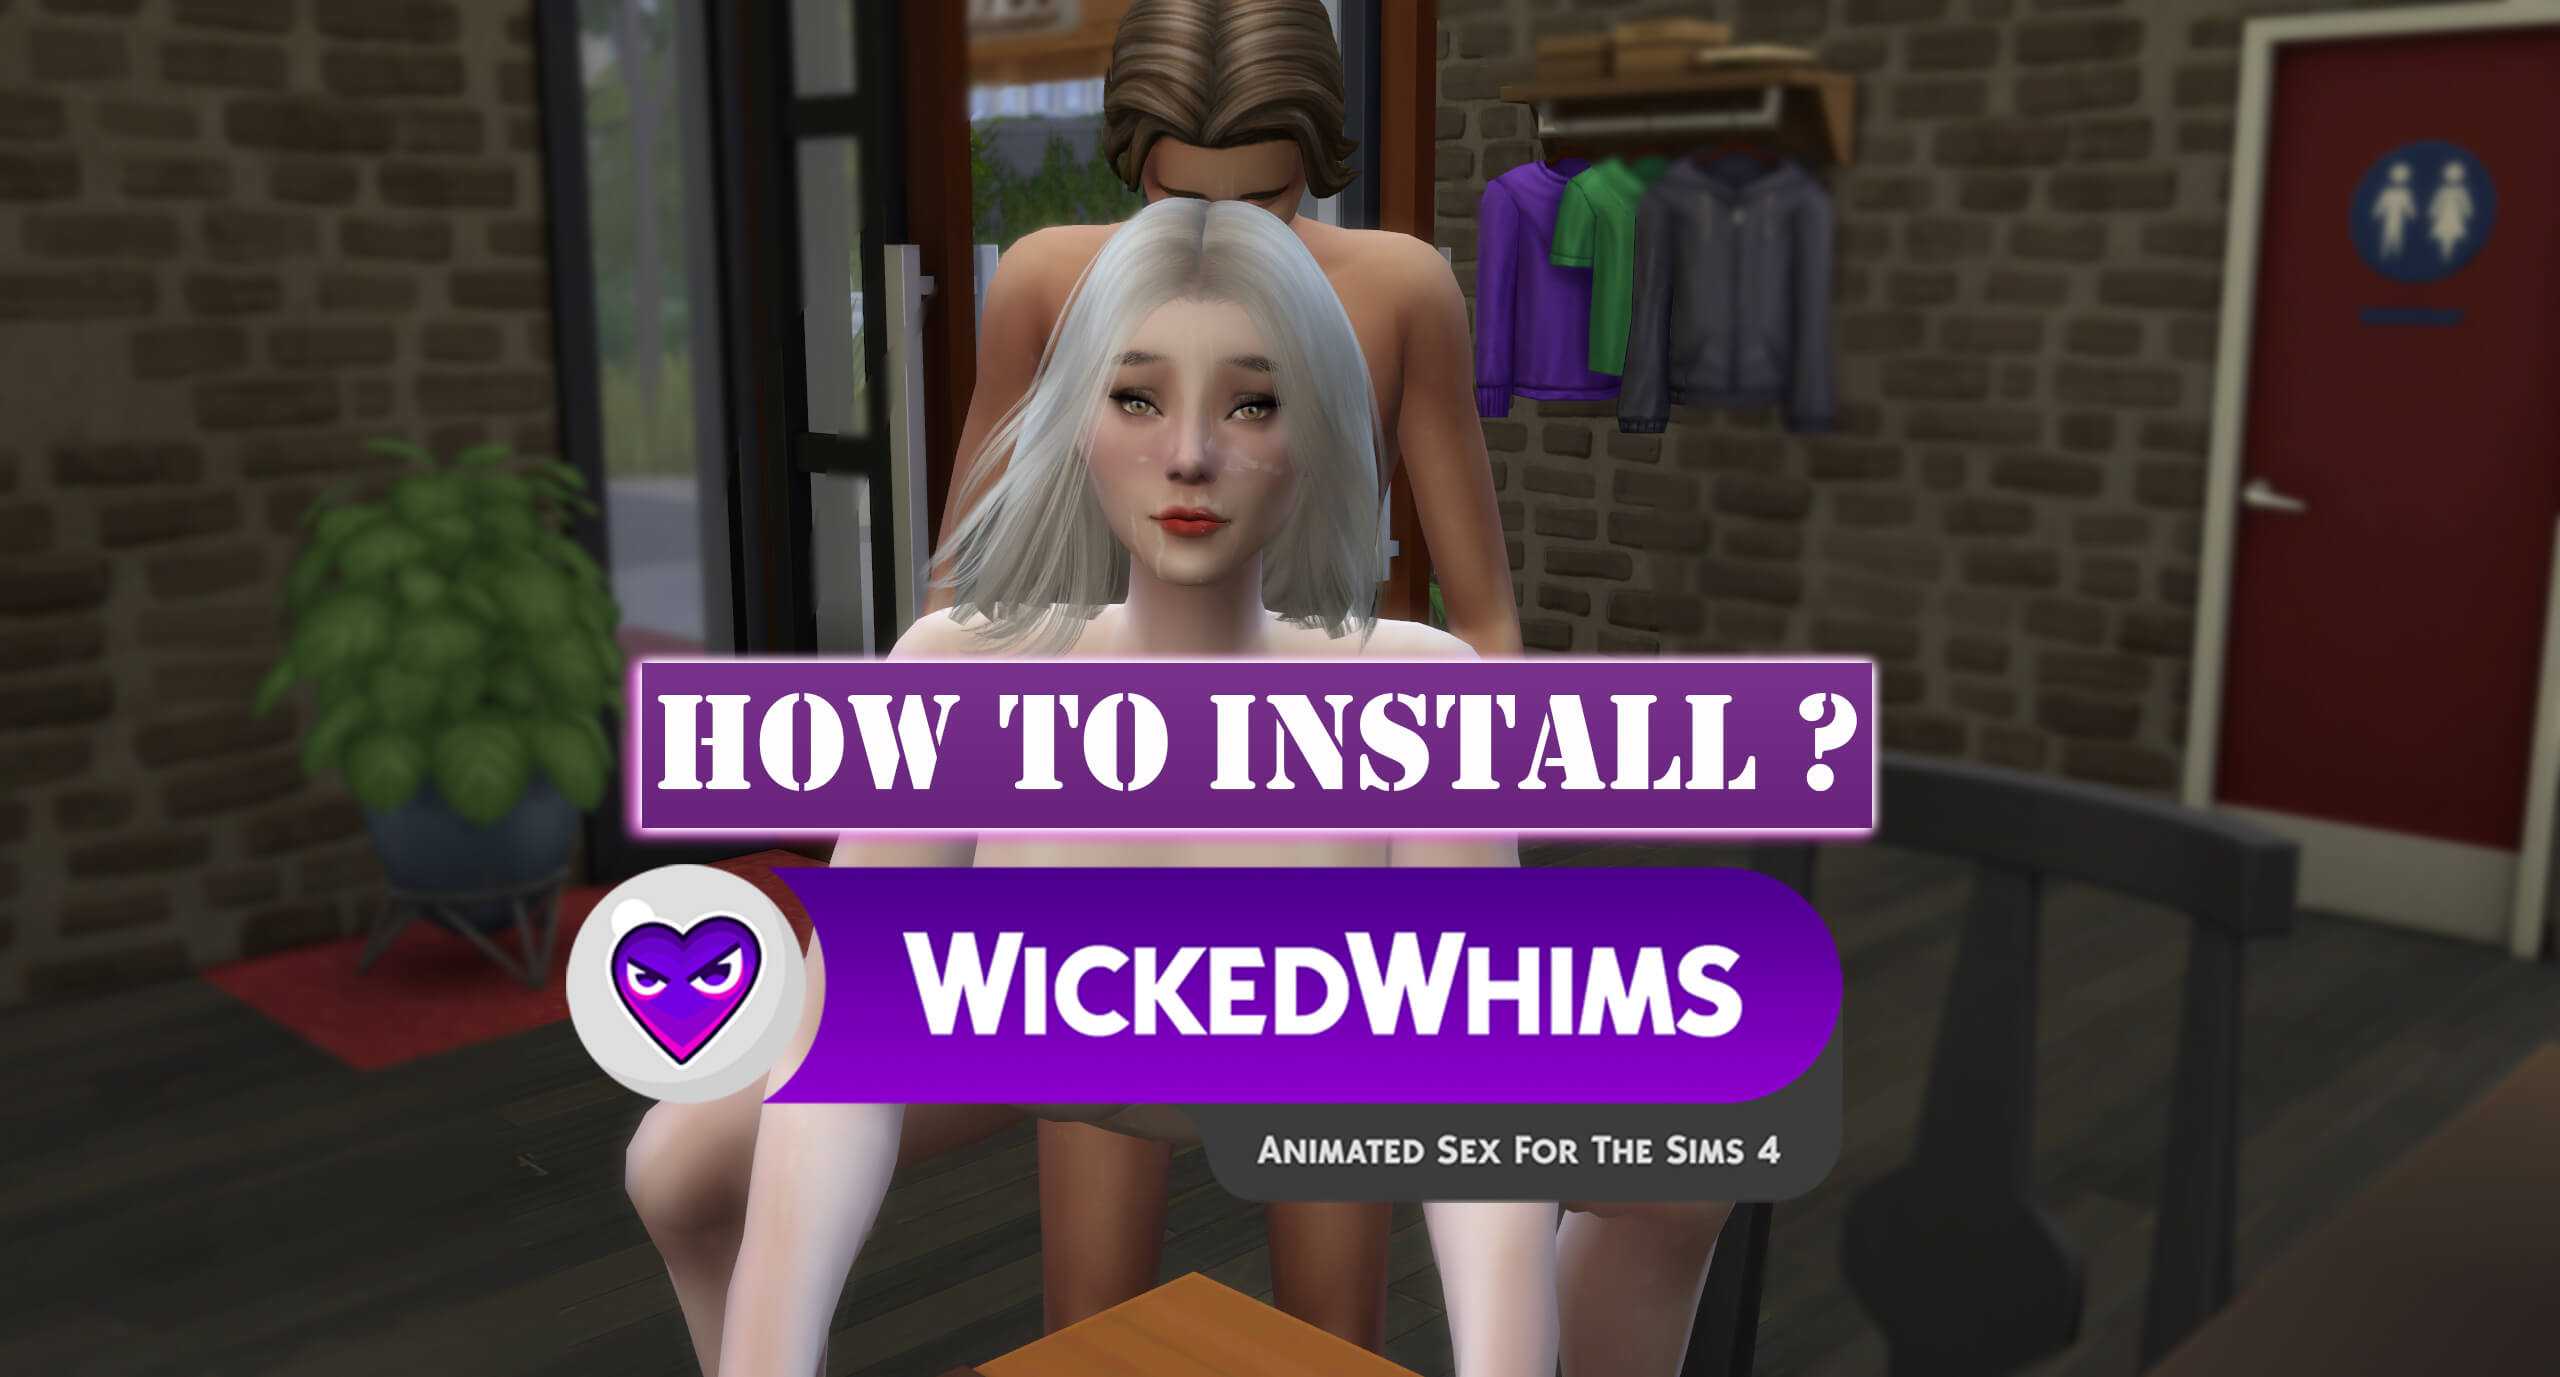 Wicked whims позы. Whims SIMS 4. Фарфоровая кукла Wicked whims. Wicked whims SIMS 4 симс 4. SIMS 4 wickedwhims последняя версия.